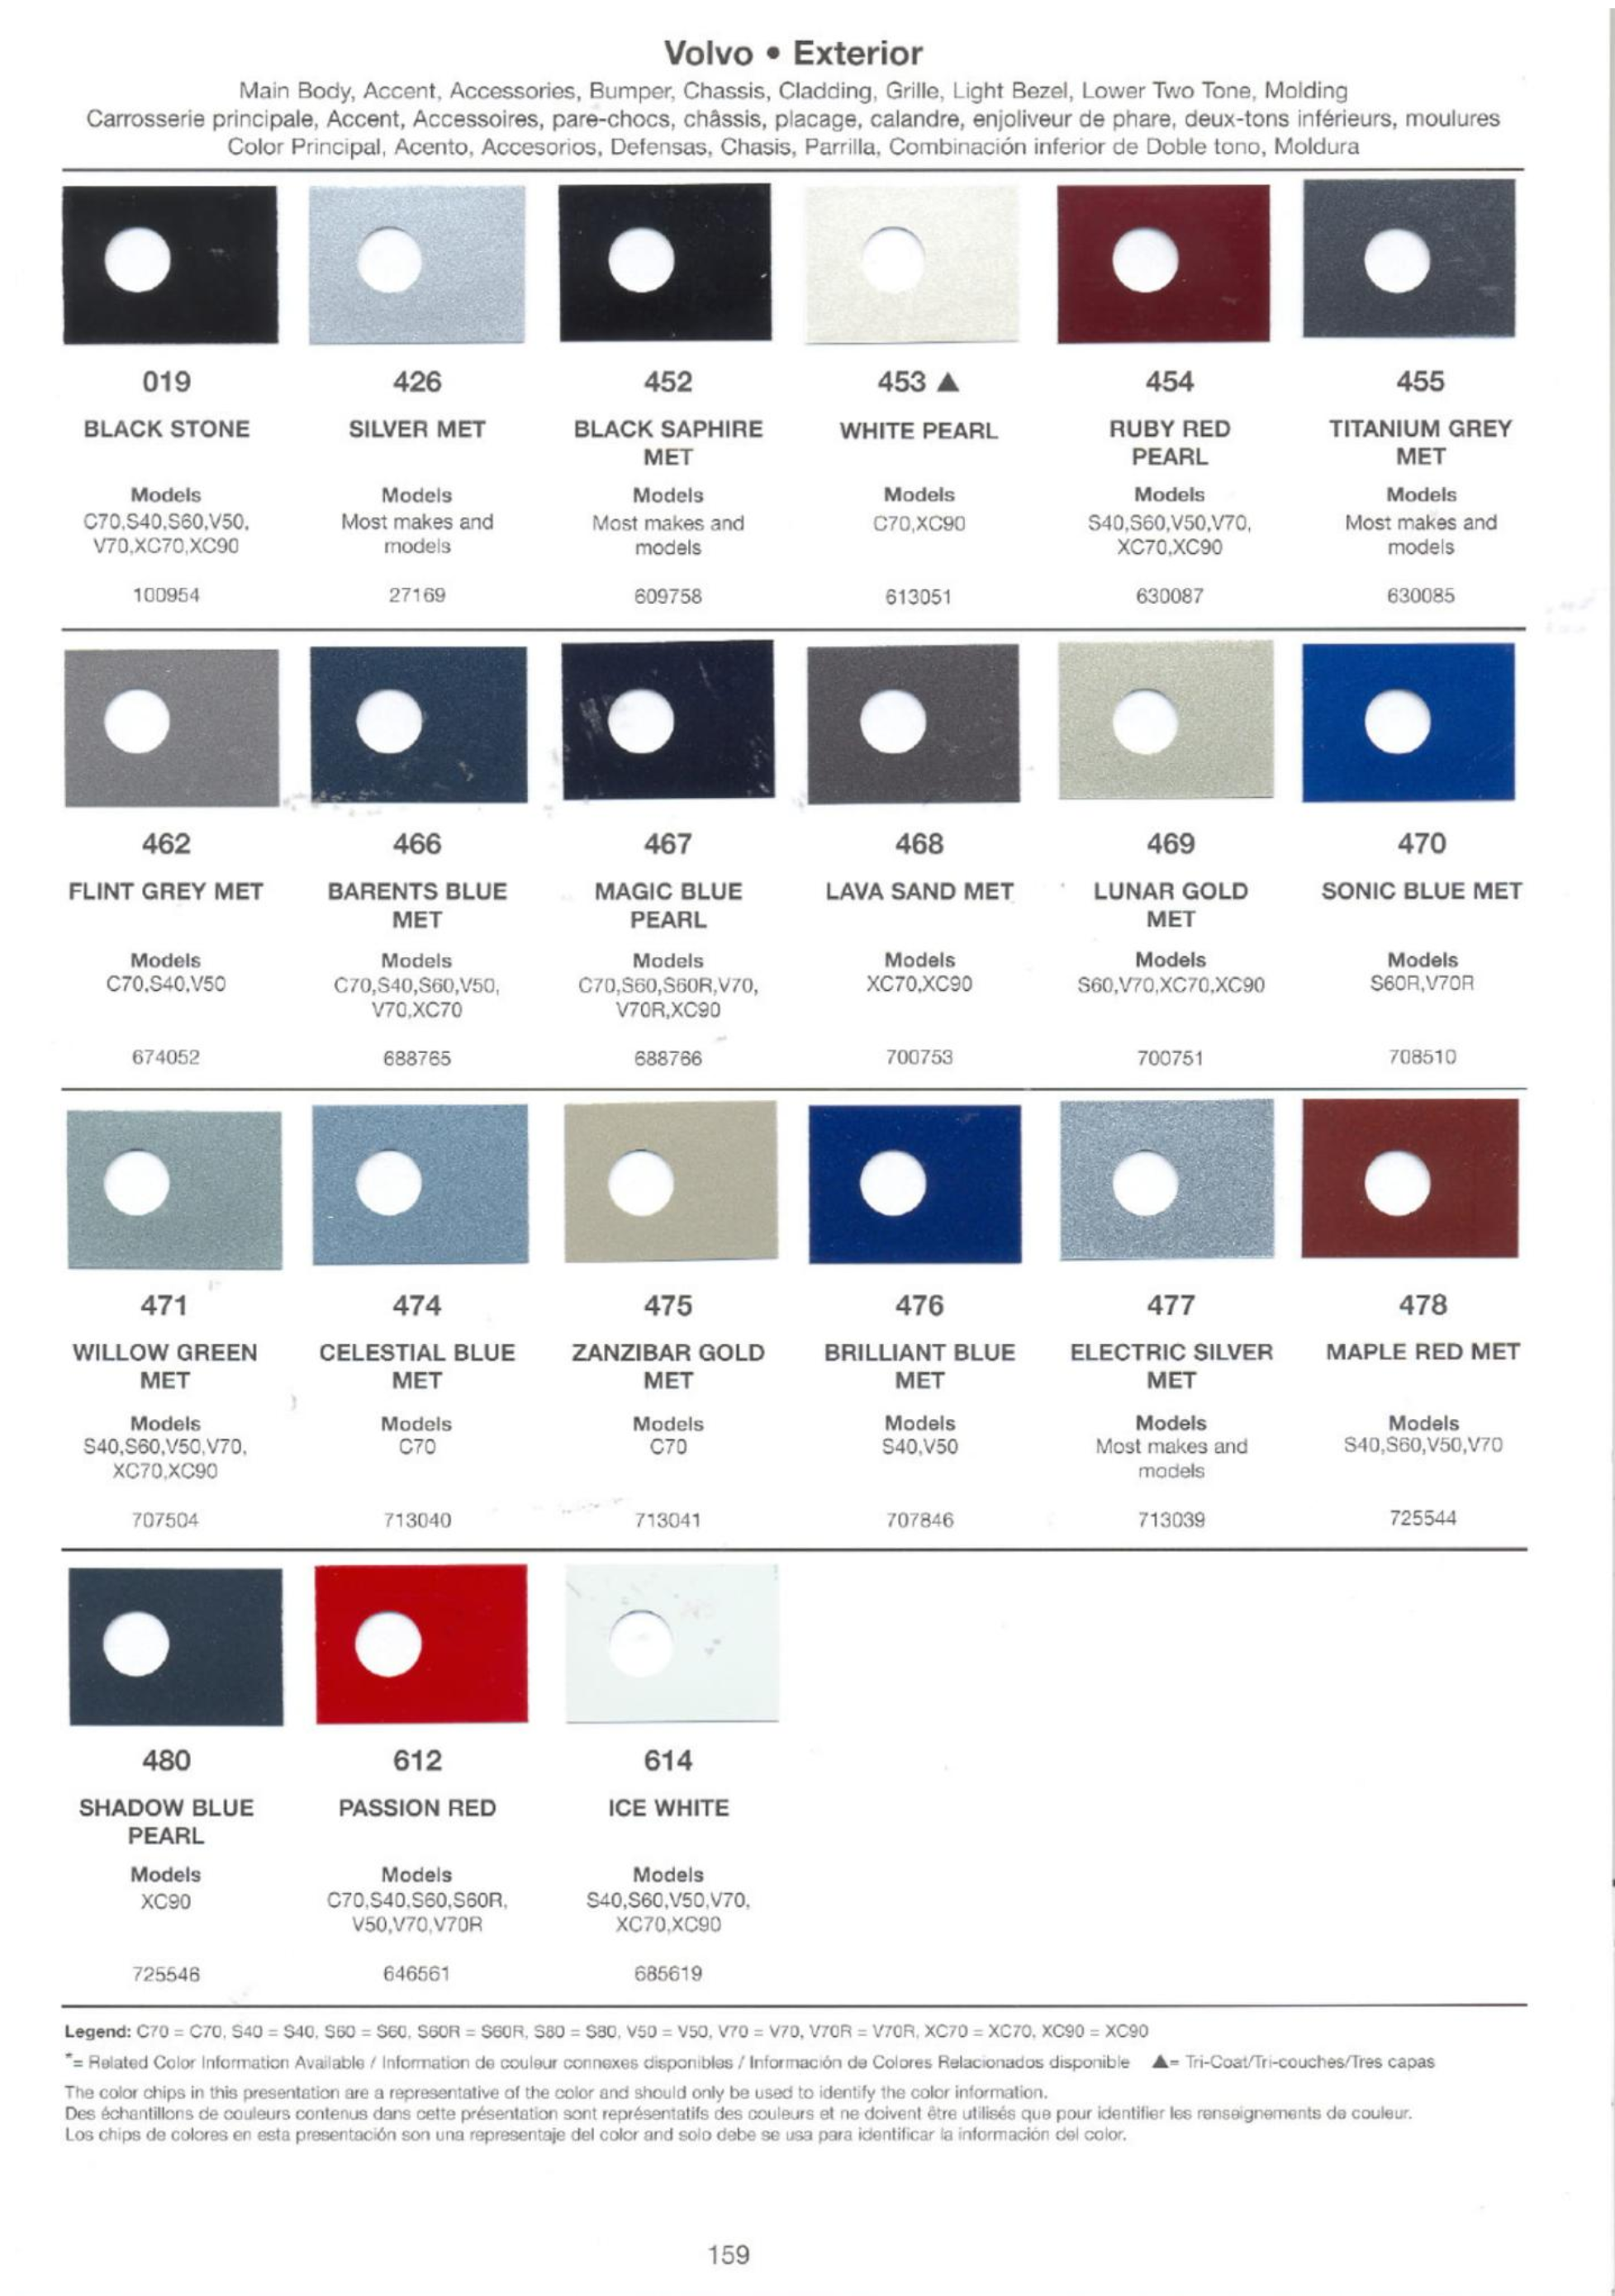 all 2007 Volvo paint codes and colors